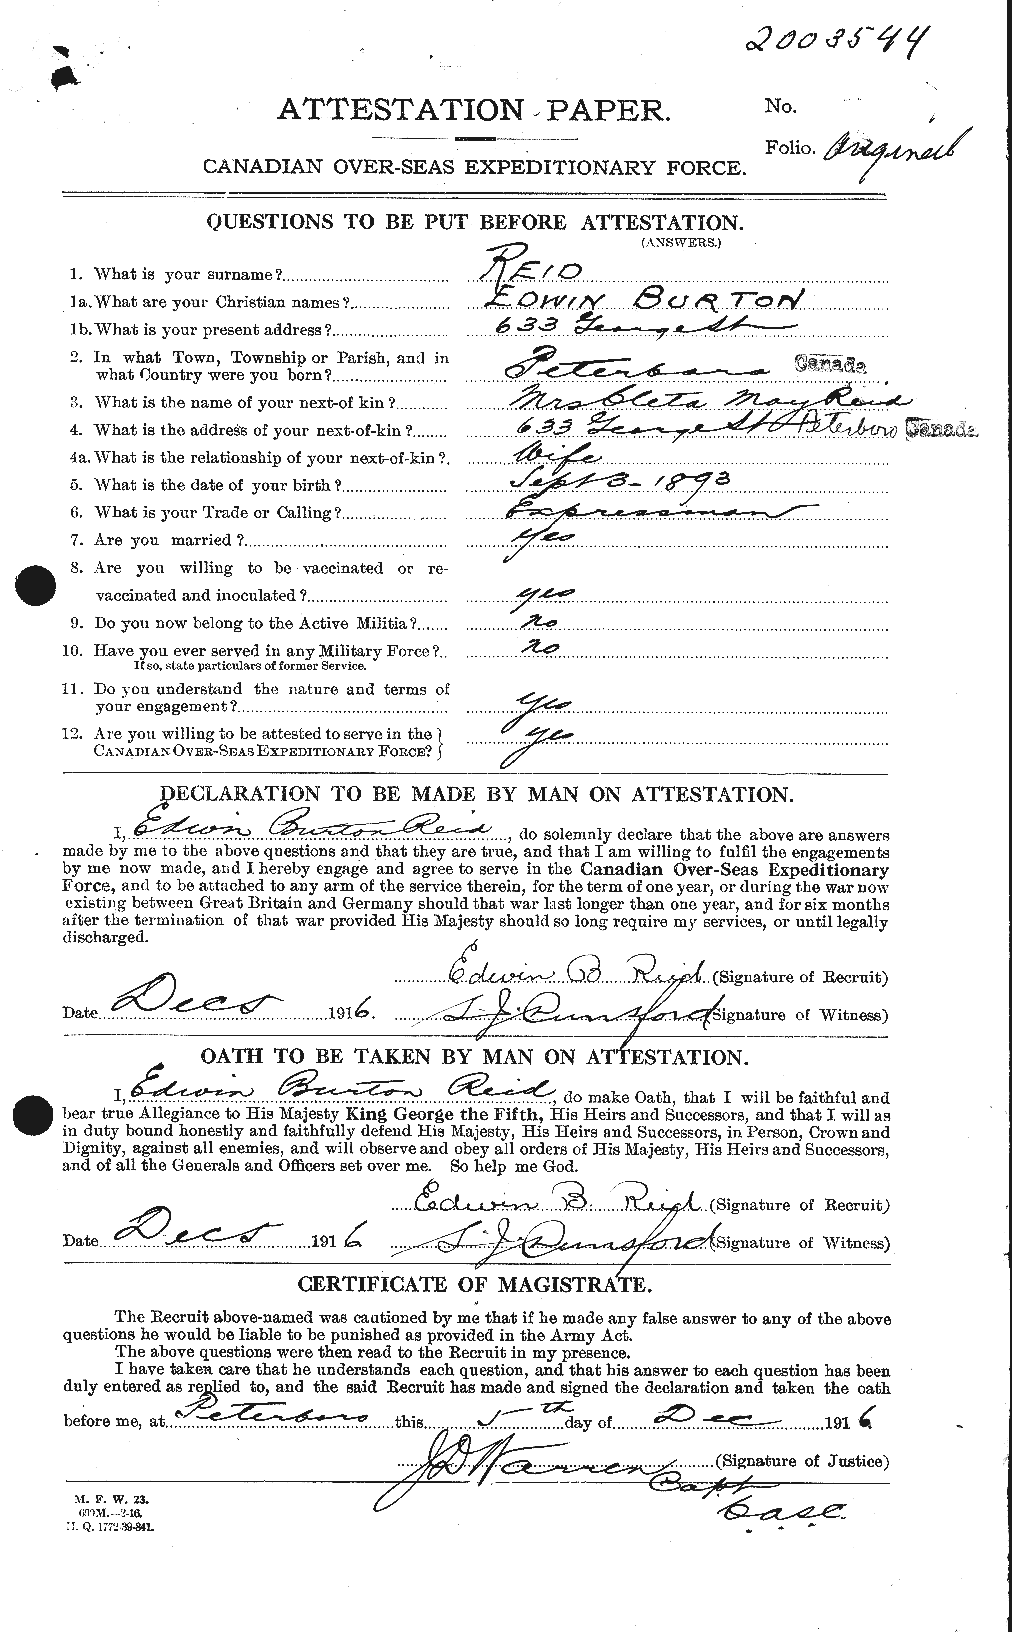 Personnel Records of the First World War - CEF 597993a